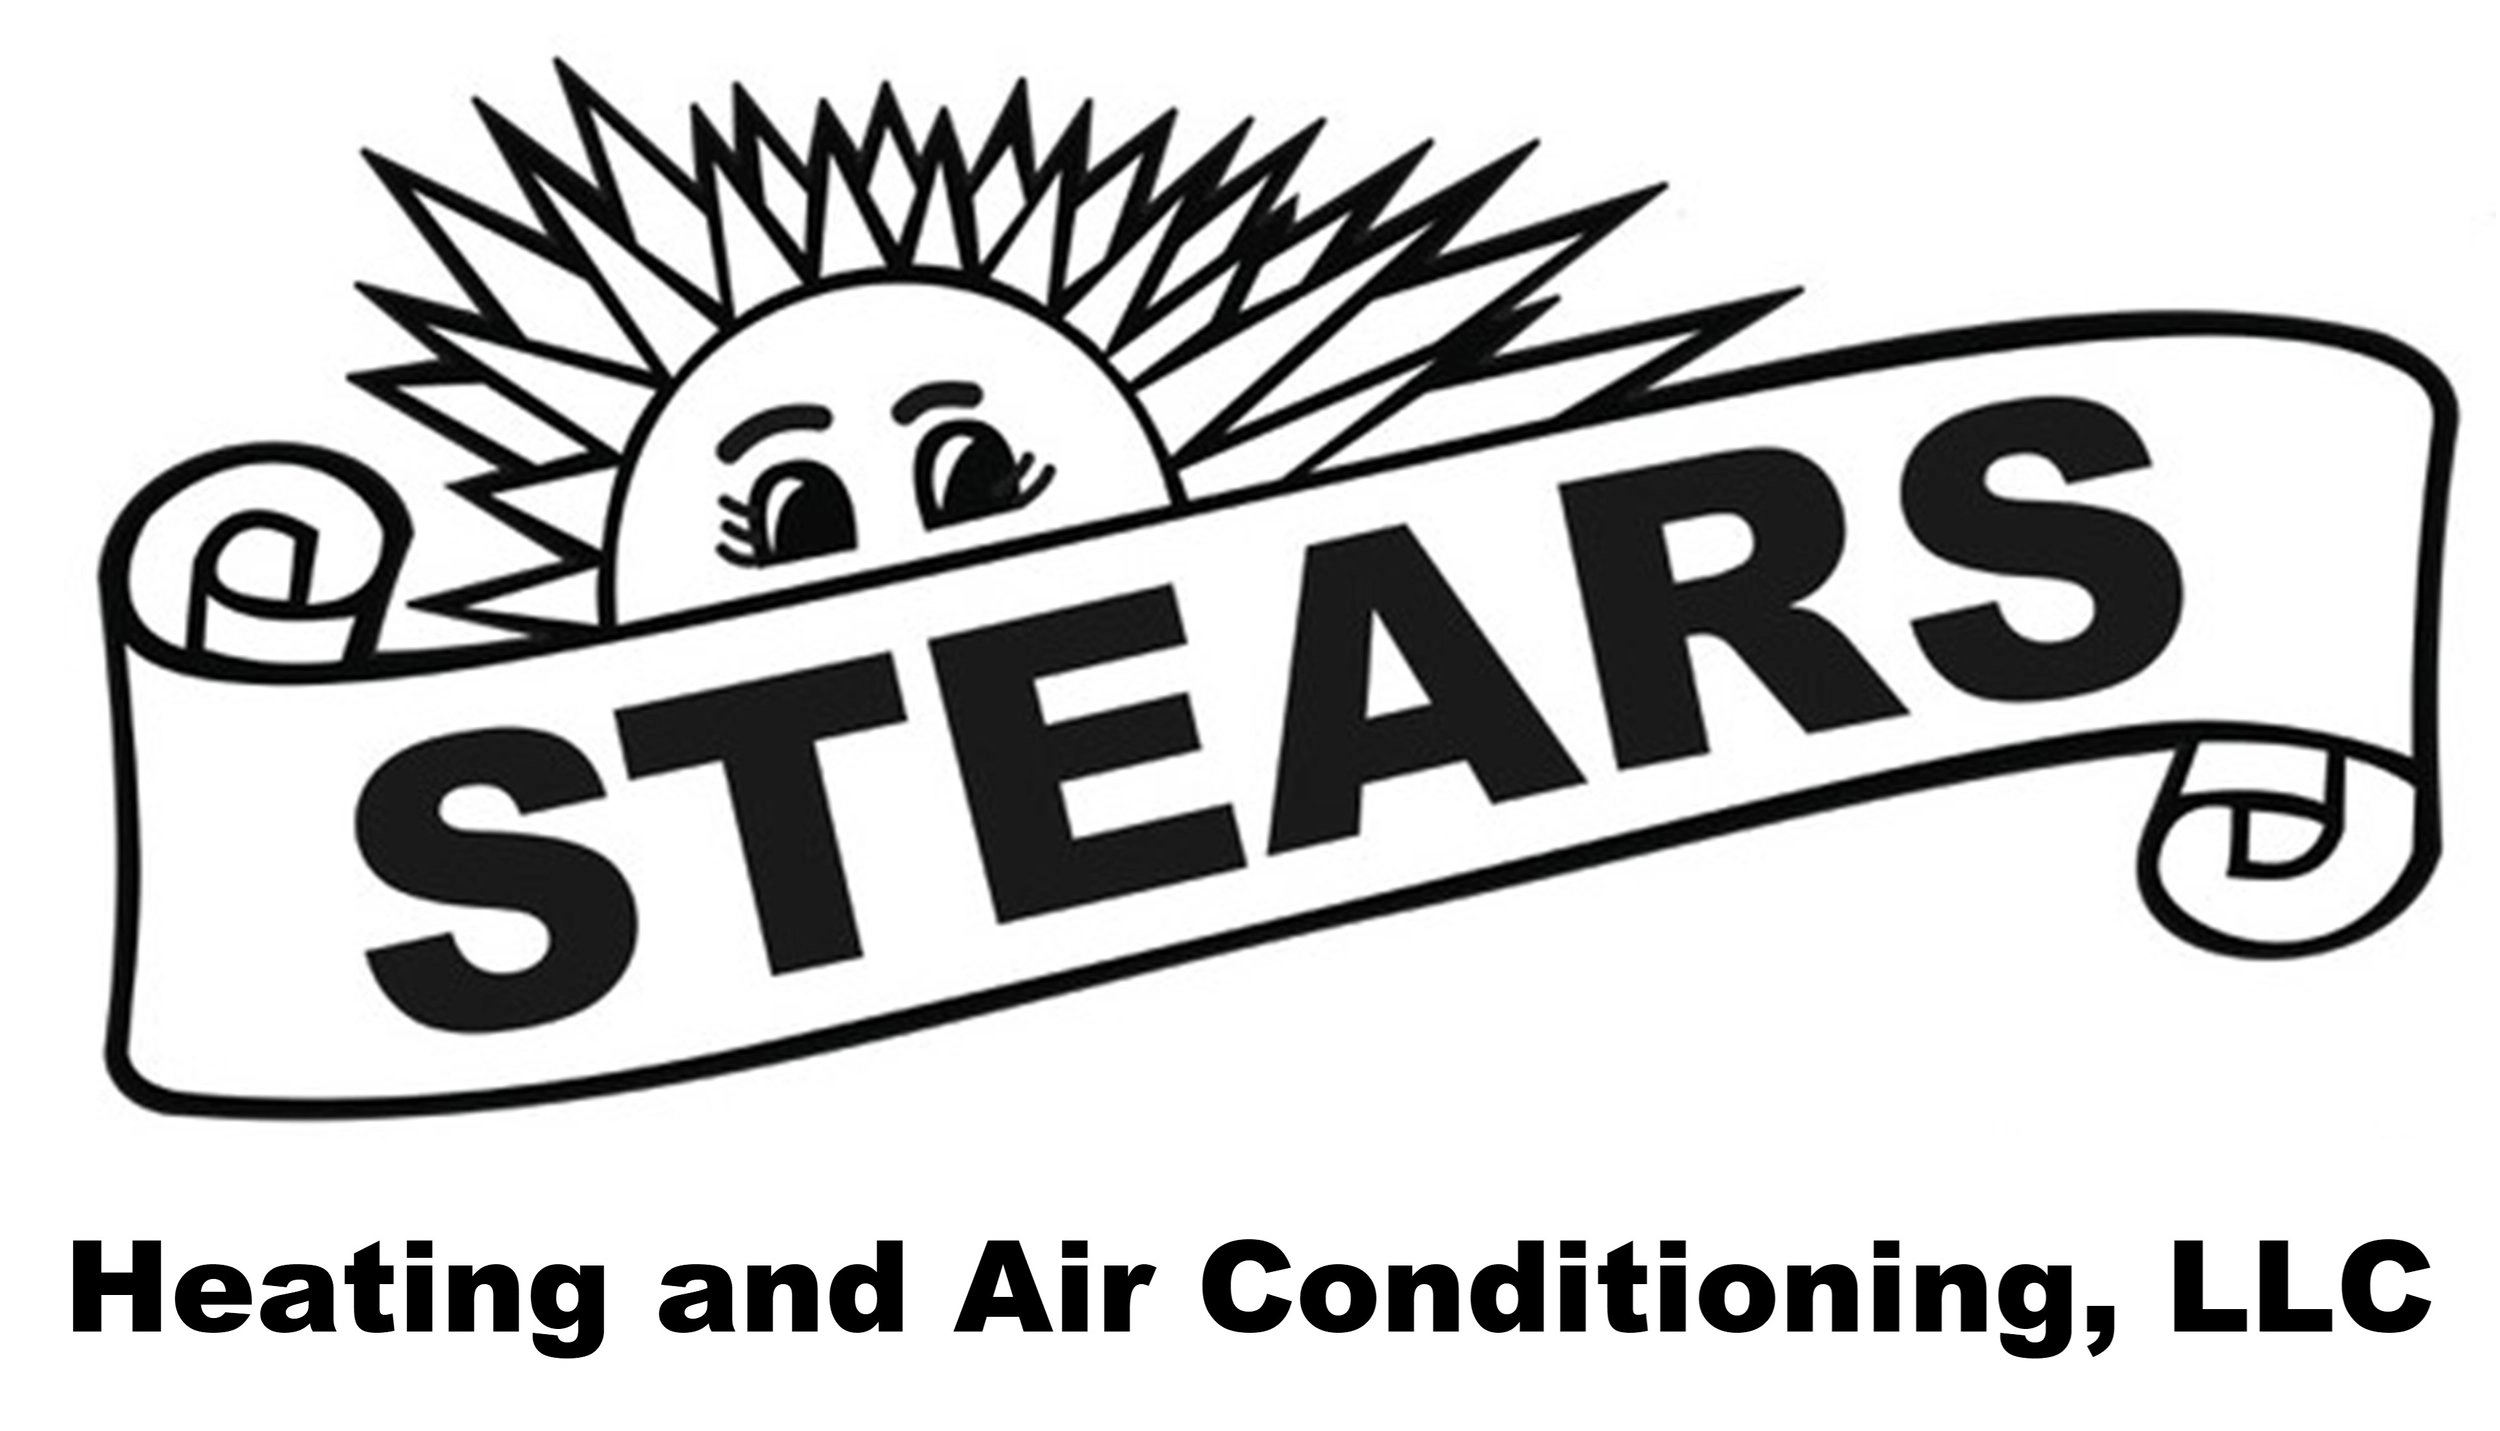 Stears Heating and Air Conditioning, LLC Logo